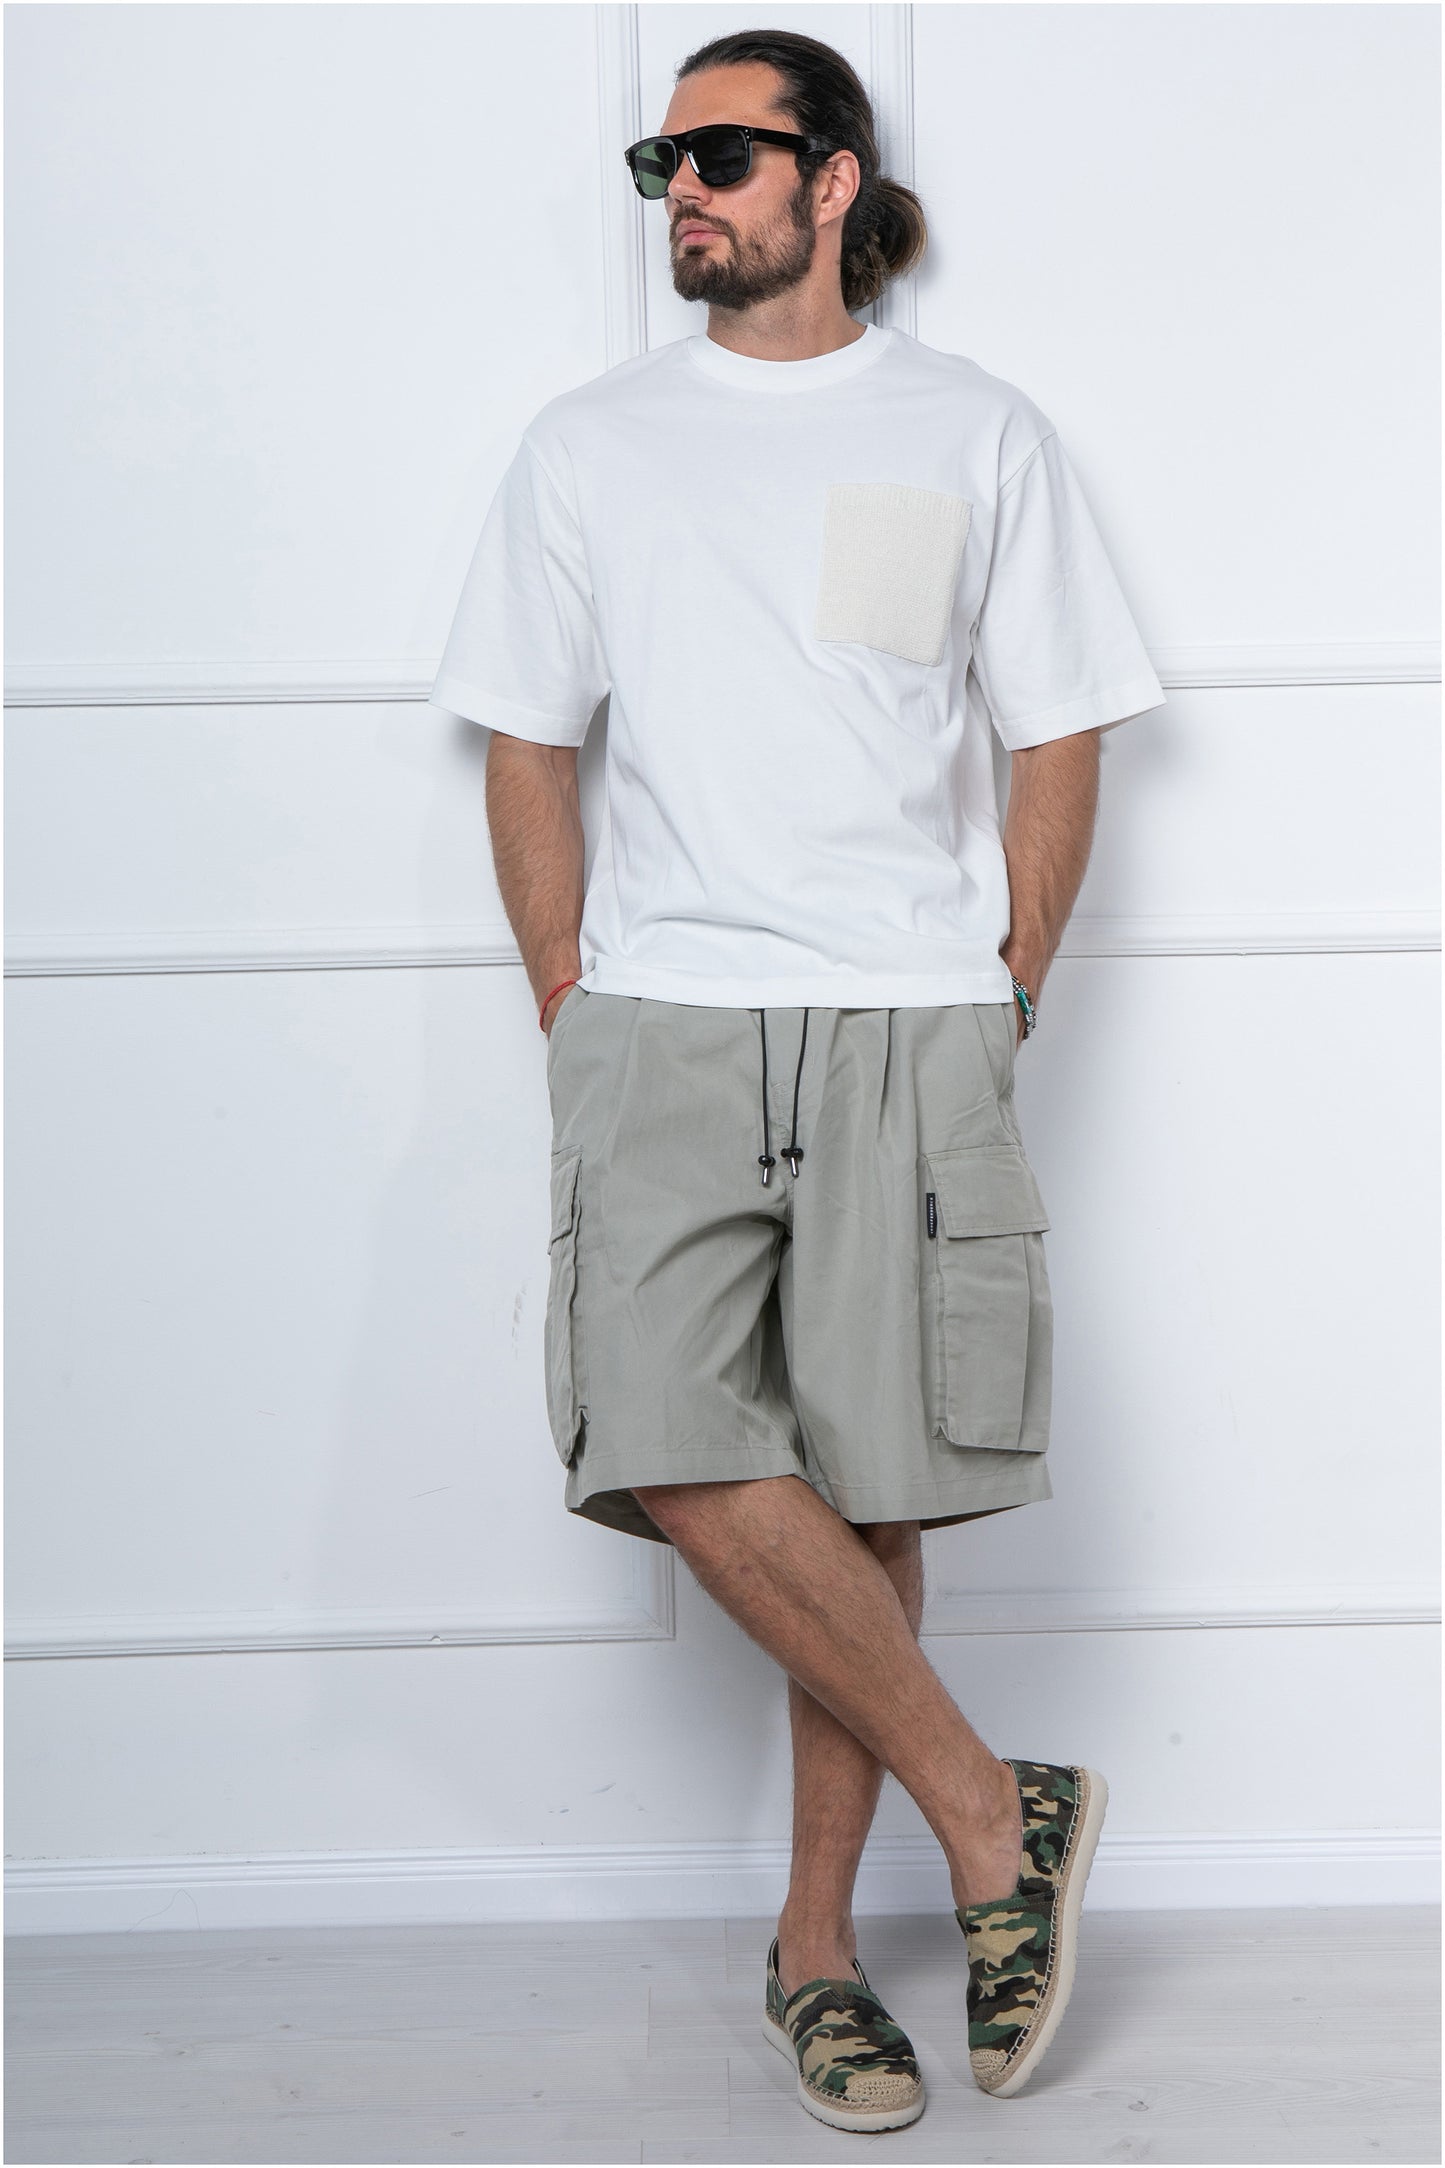 Gianni Lupo - DOUBLE LABEL 'CargOver' Short